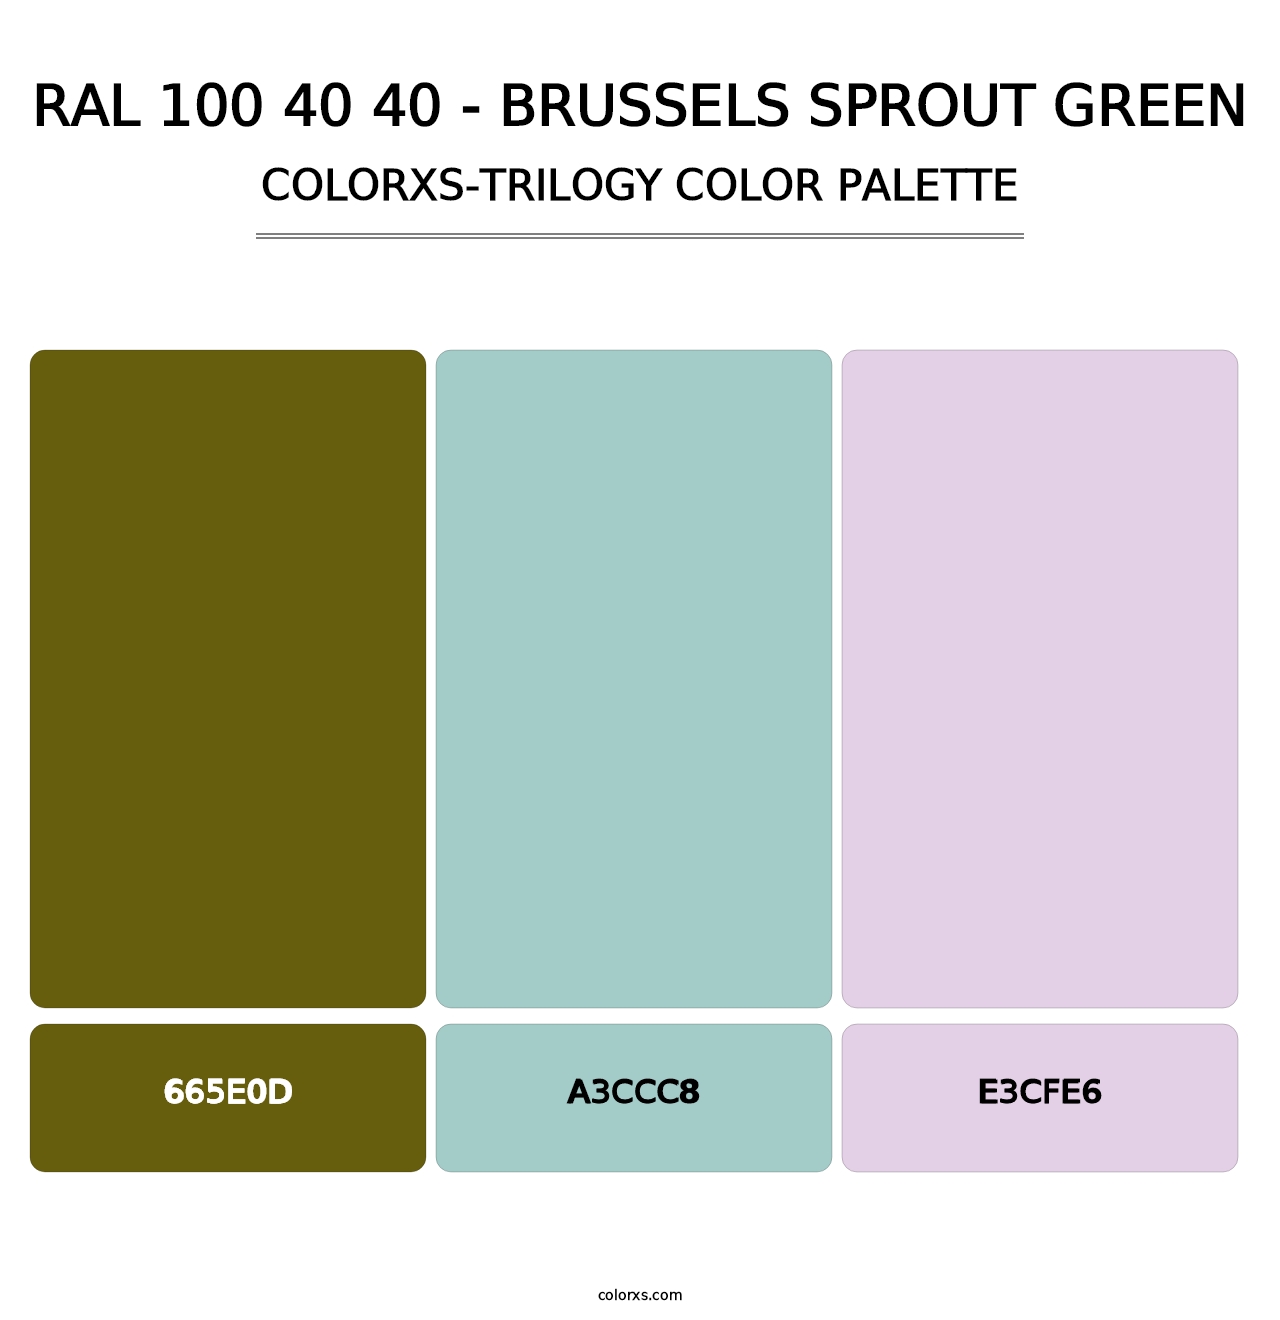 RAL 100 40 40 - Brussels Sprout Green - Colorxs Trilogy Palette